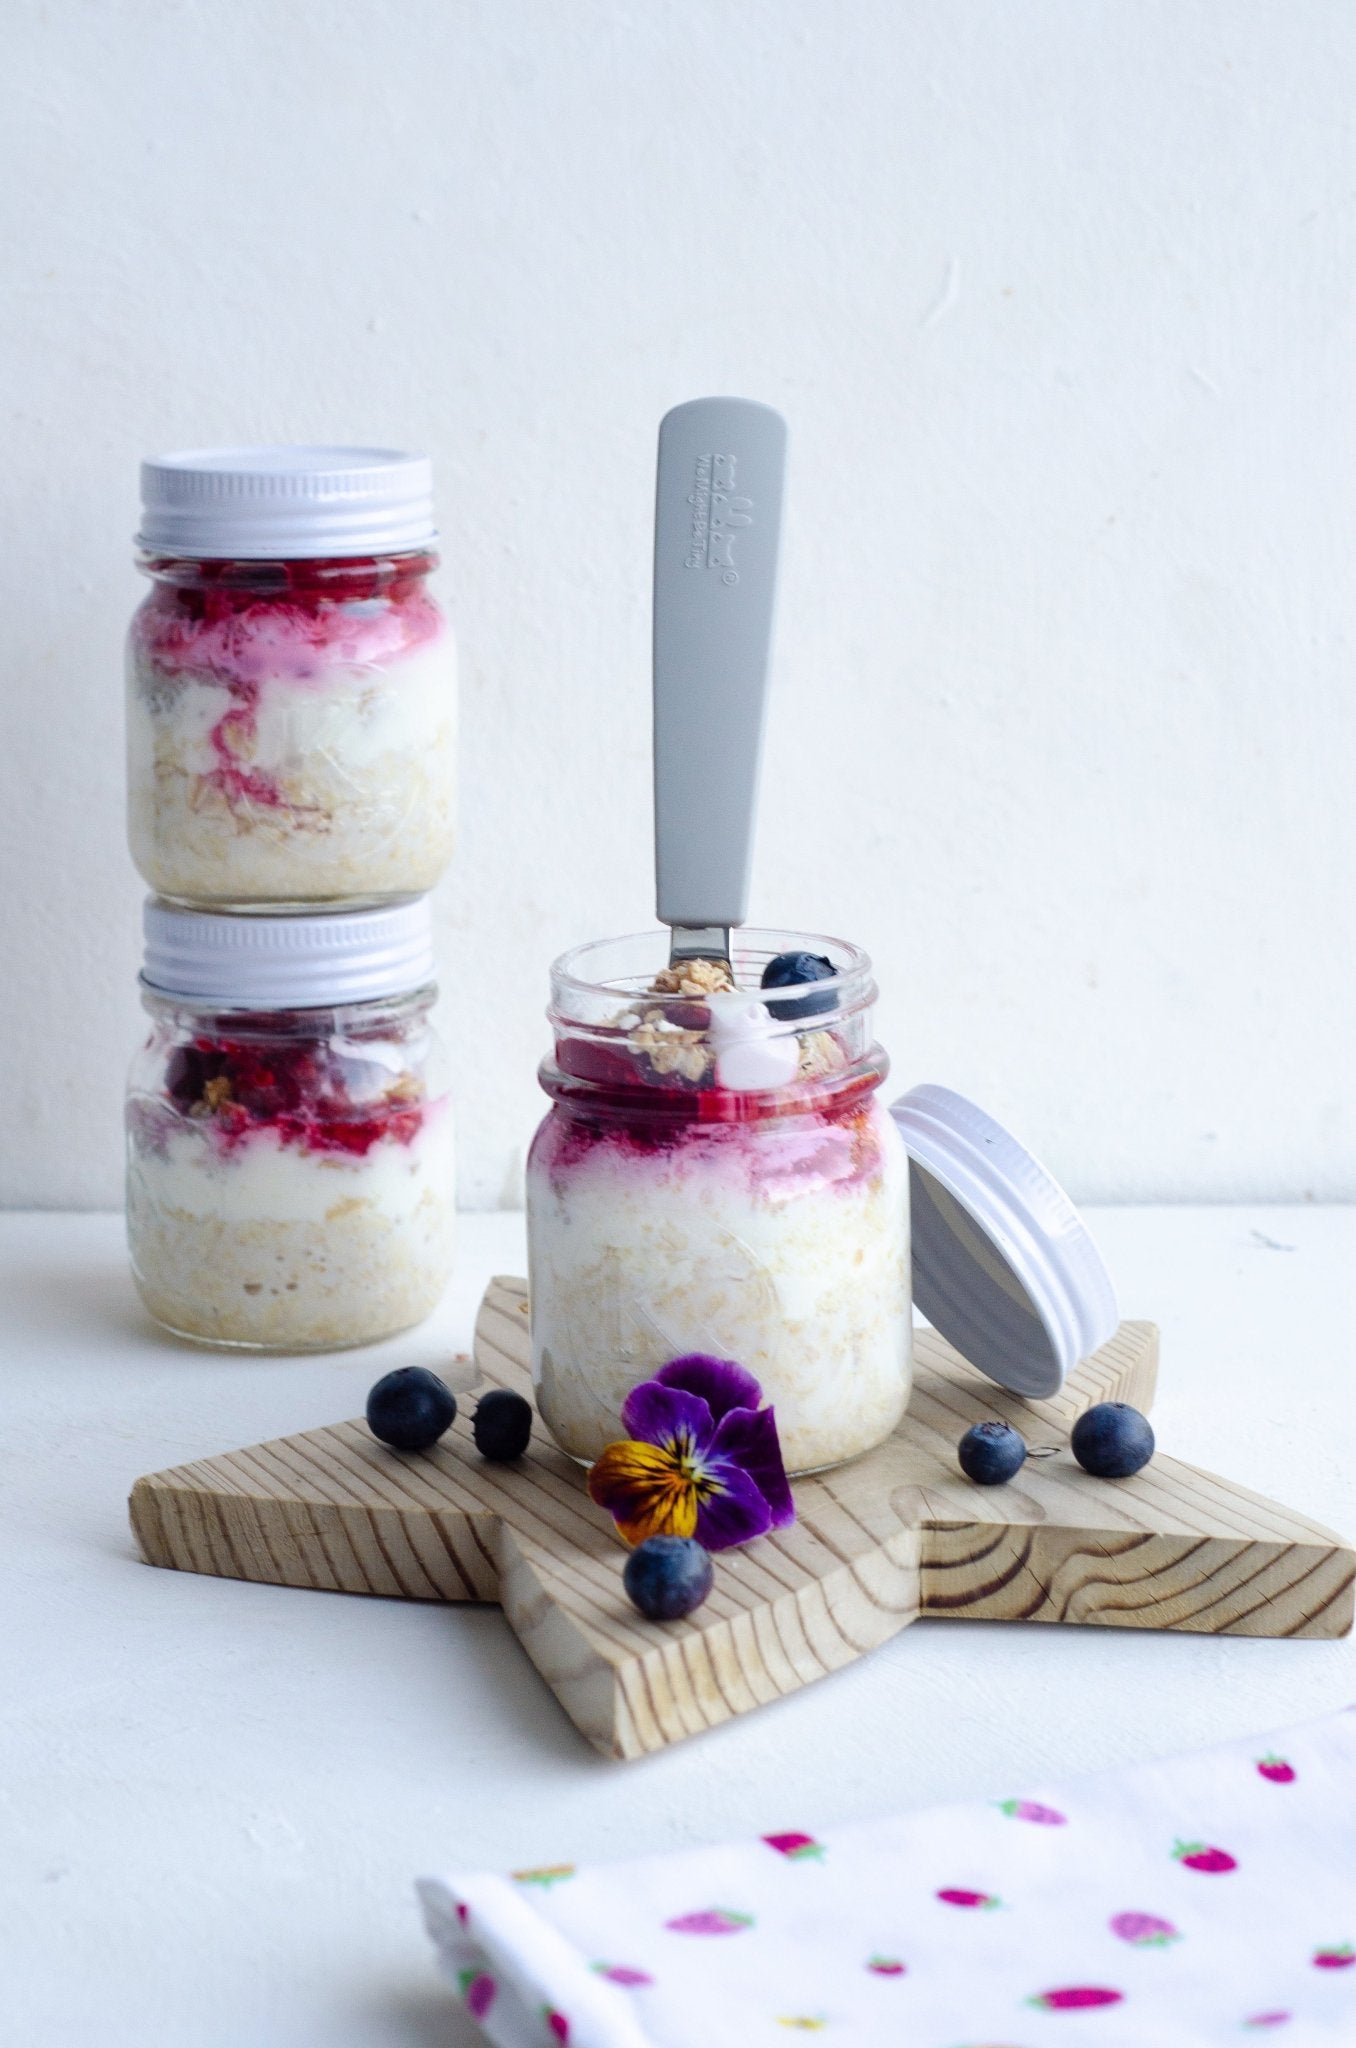 Nourish Your Mornings: Overnight Raspberry Oats for a Delicious Start